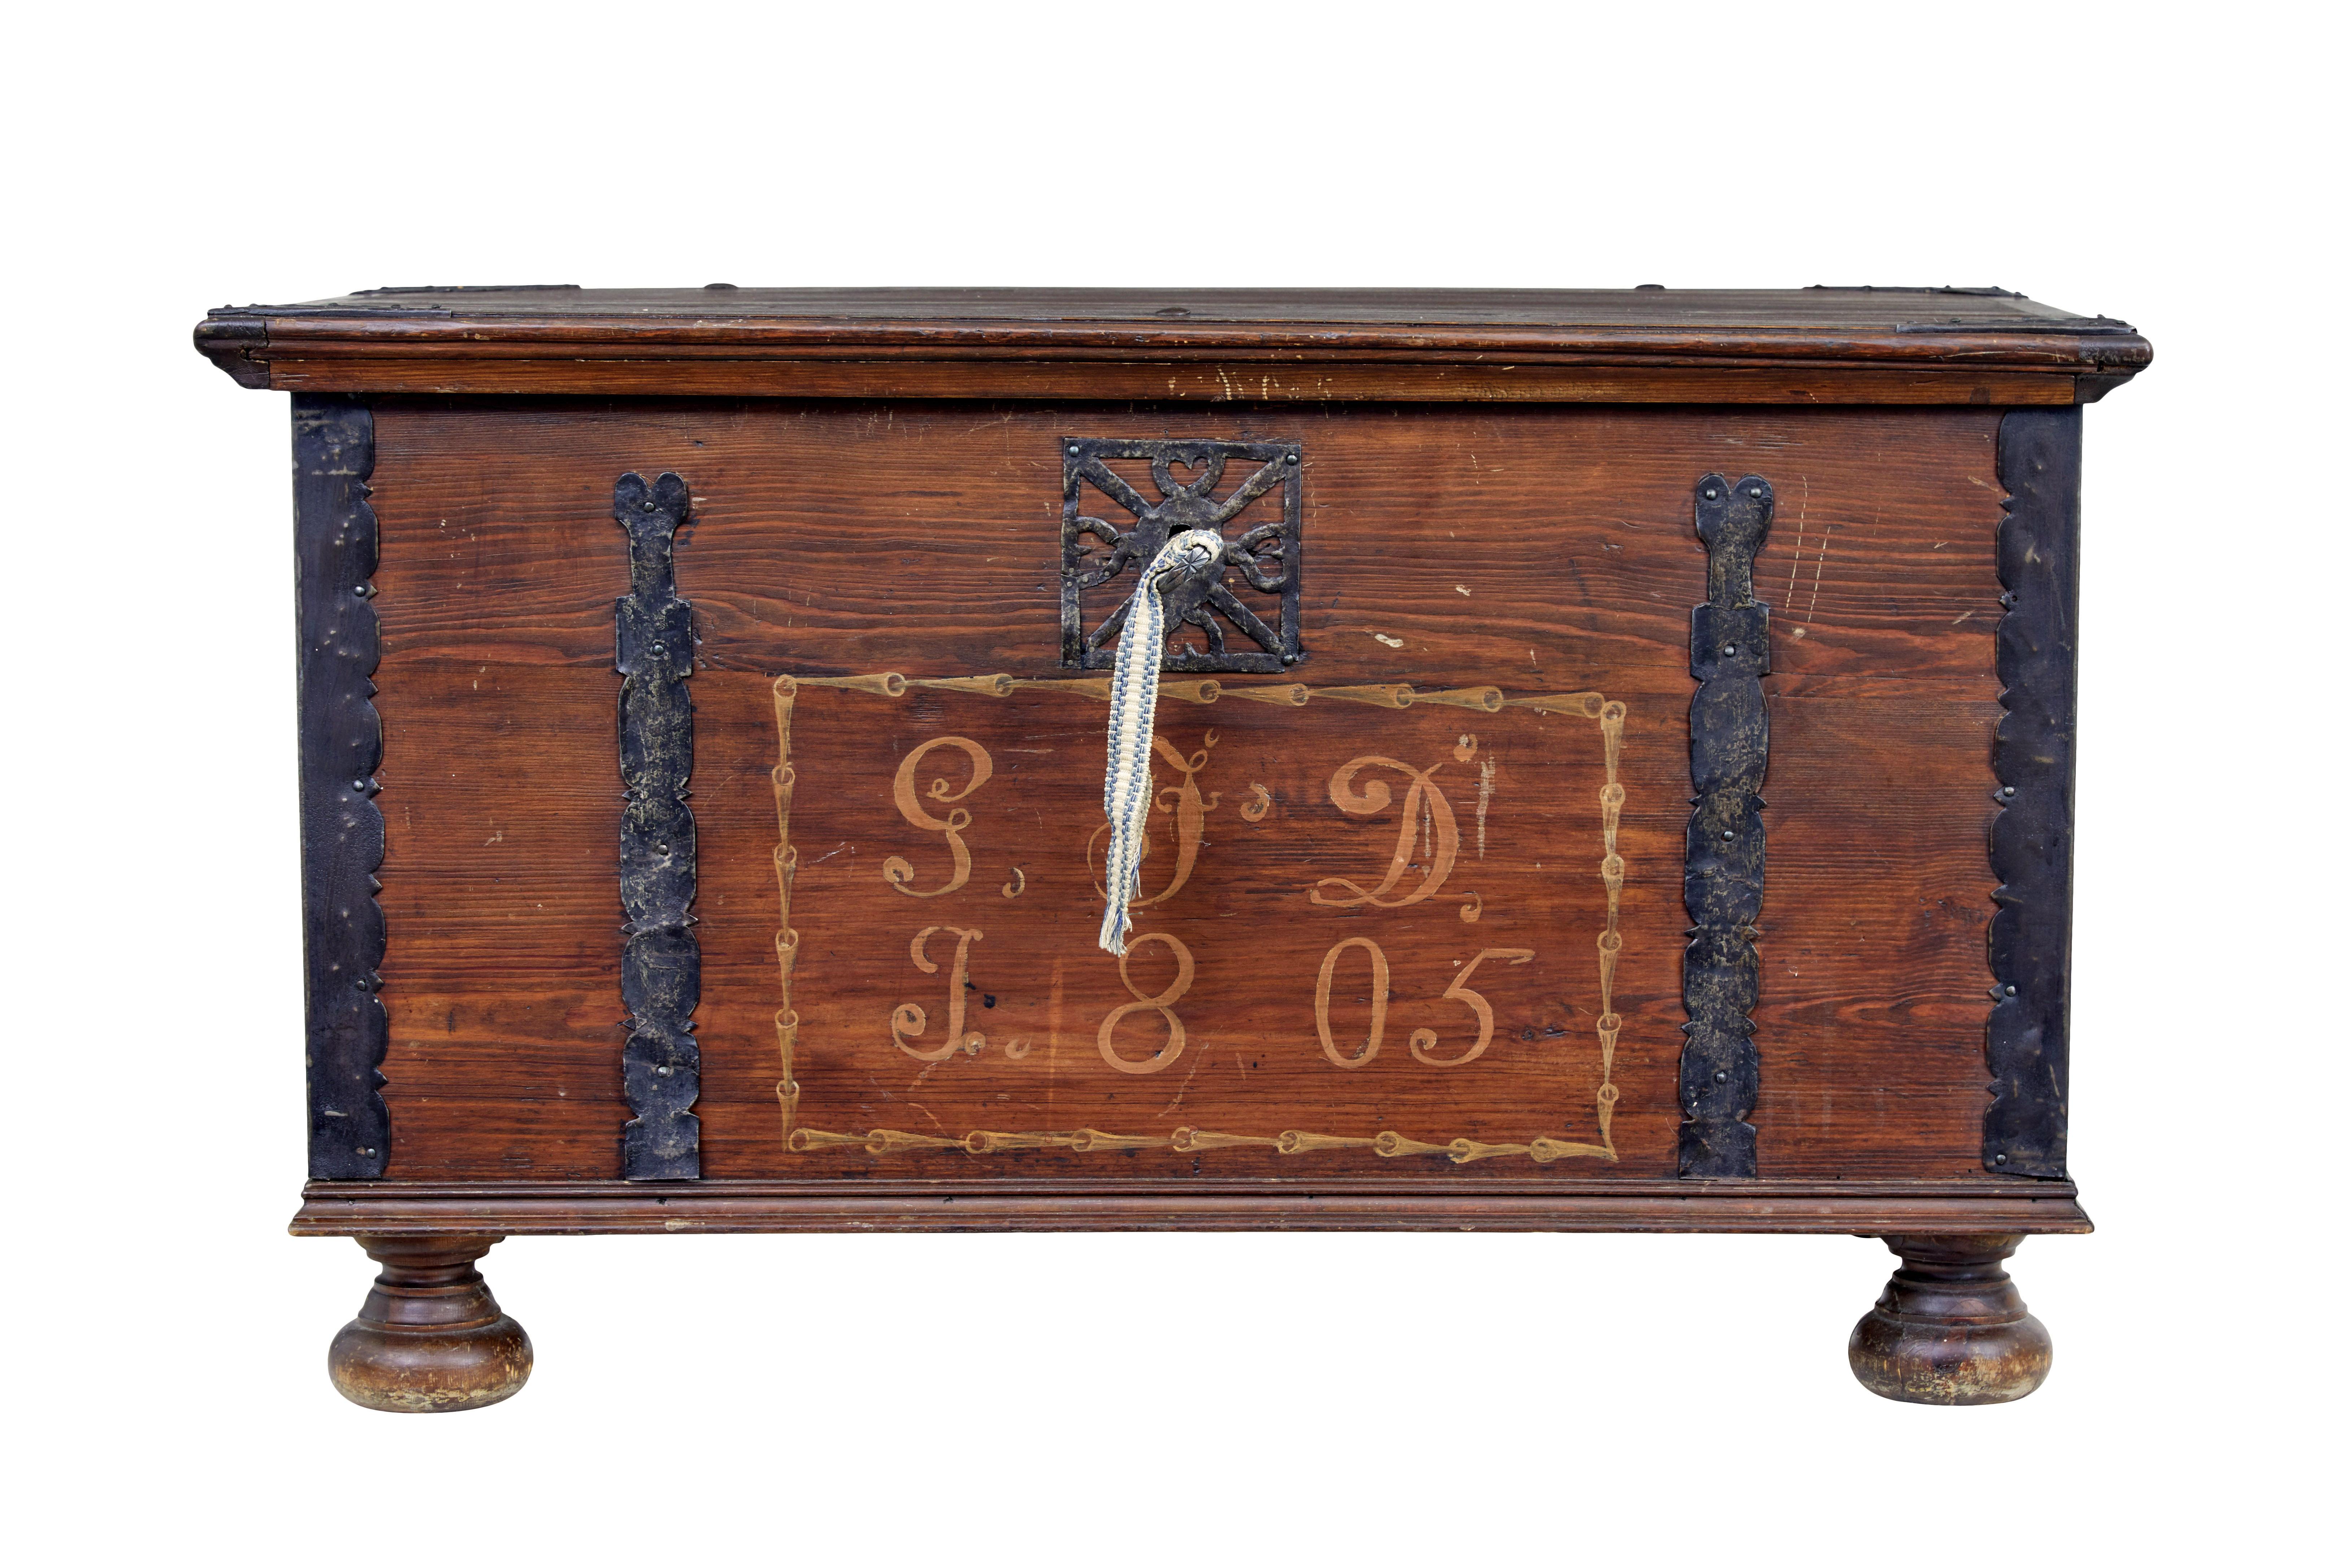 Early 19th century hand decorated swedish pine coffer circa 1805.

Real piece of rural swedish woodwork from the early 19th century.

Pine rectangular box, which has been stained a dark brown, complete with original metal strap work and hinges,